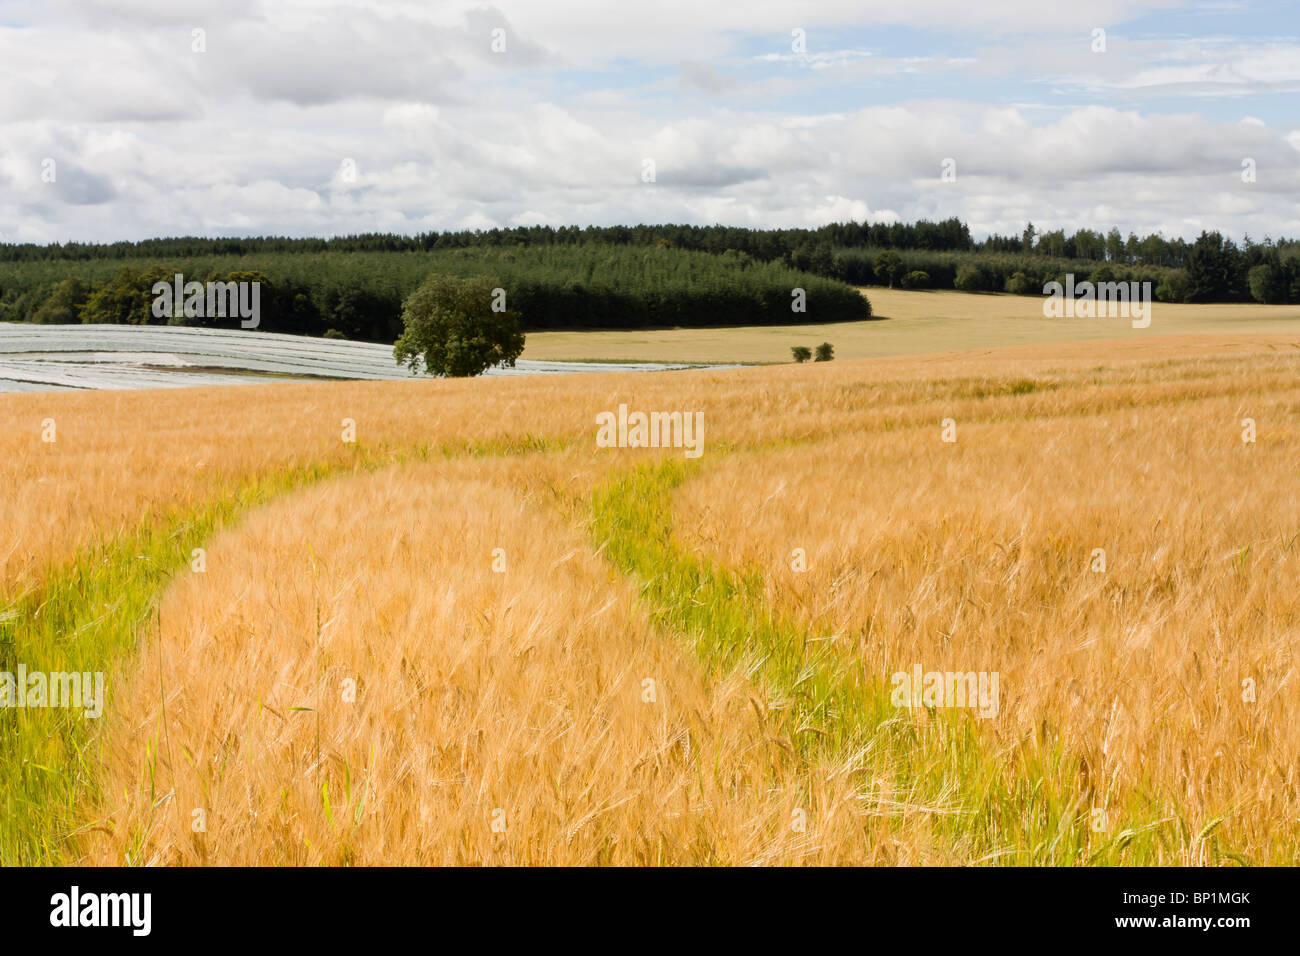 Scottish farming scene with cereal crop in foreground and soft fruit poly tunnels in distance. Stock Photo